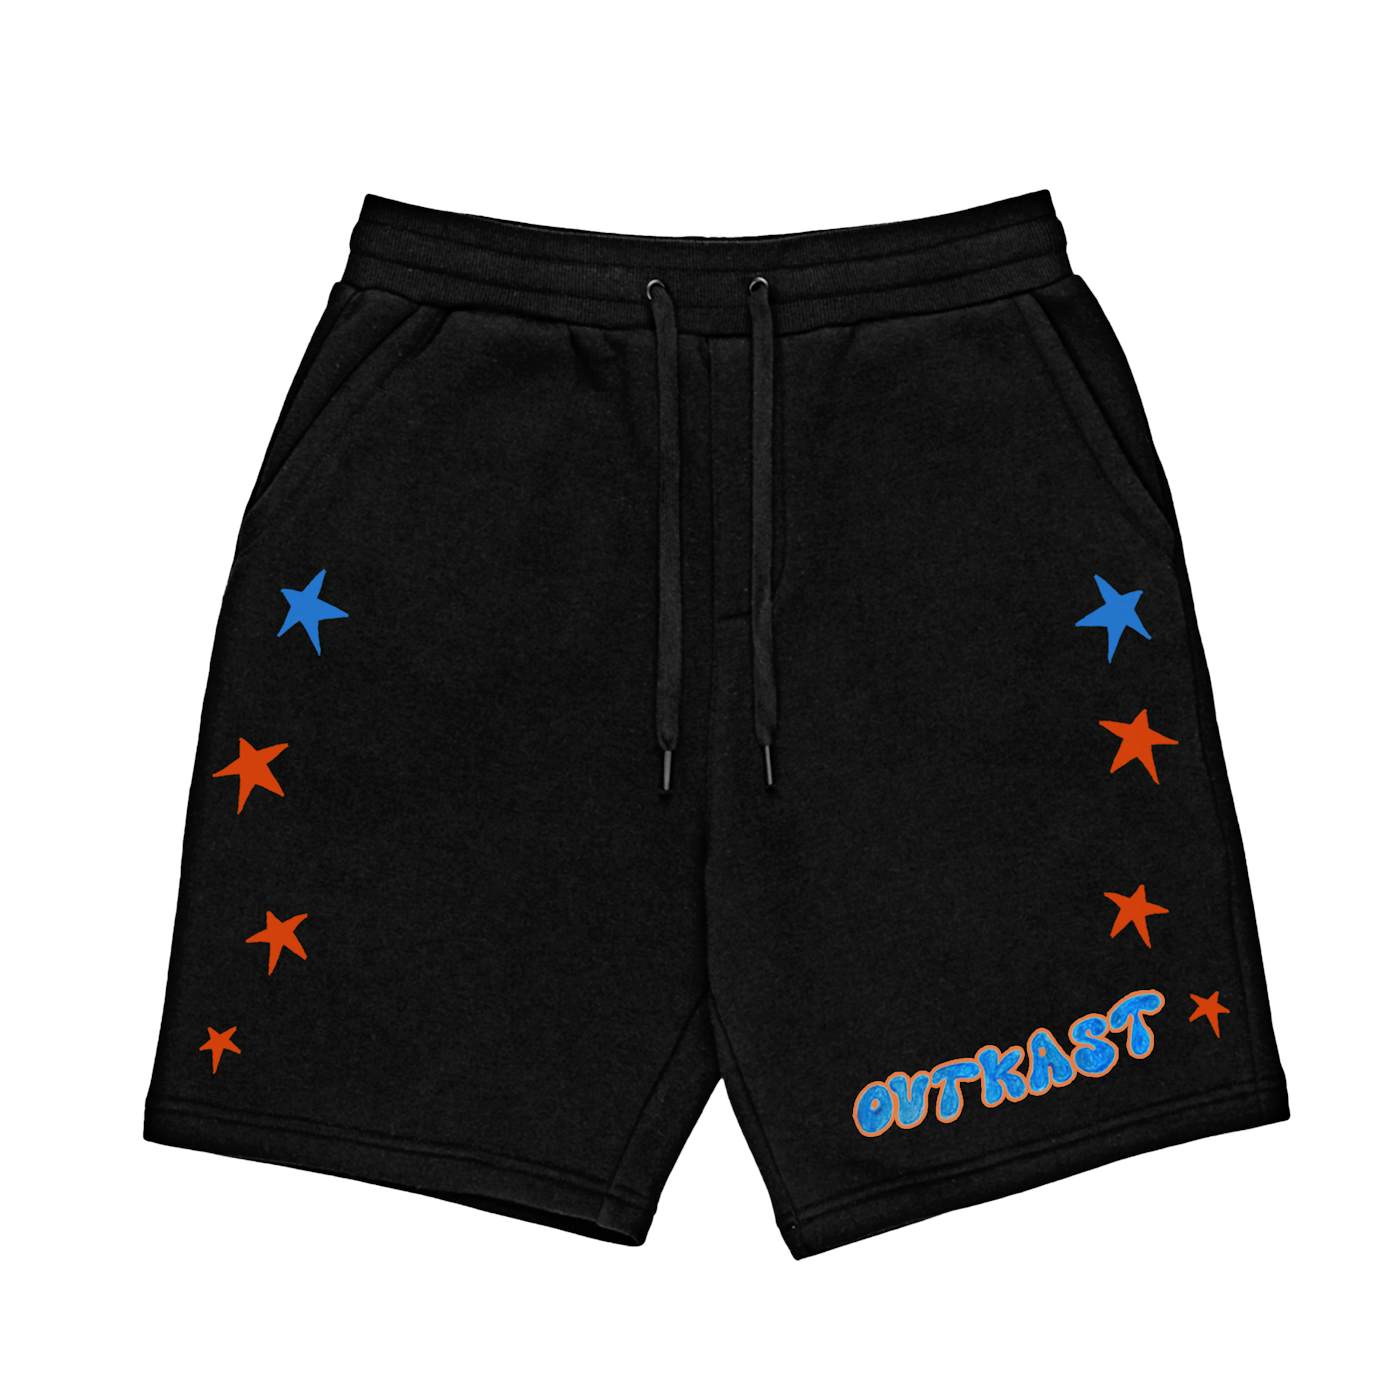 Wet Booty Shorts – YFN Lucci Store